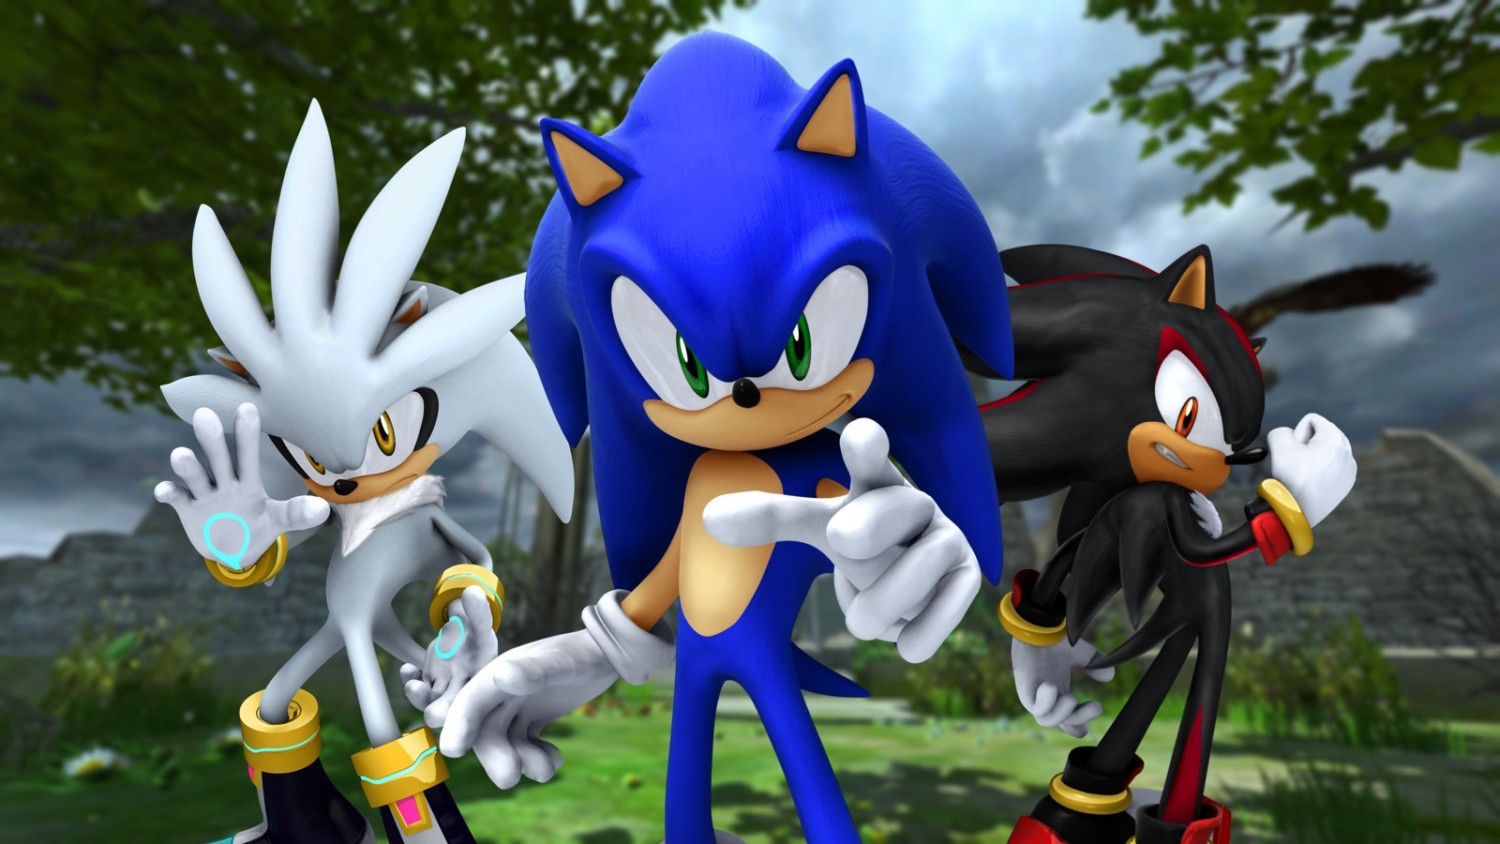 Sega delisting standalone versions of Sonic 1, 2, 3, and CD ahead